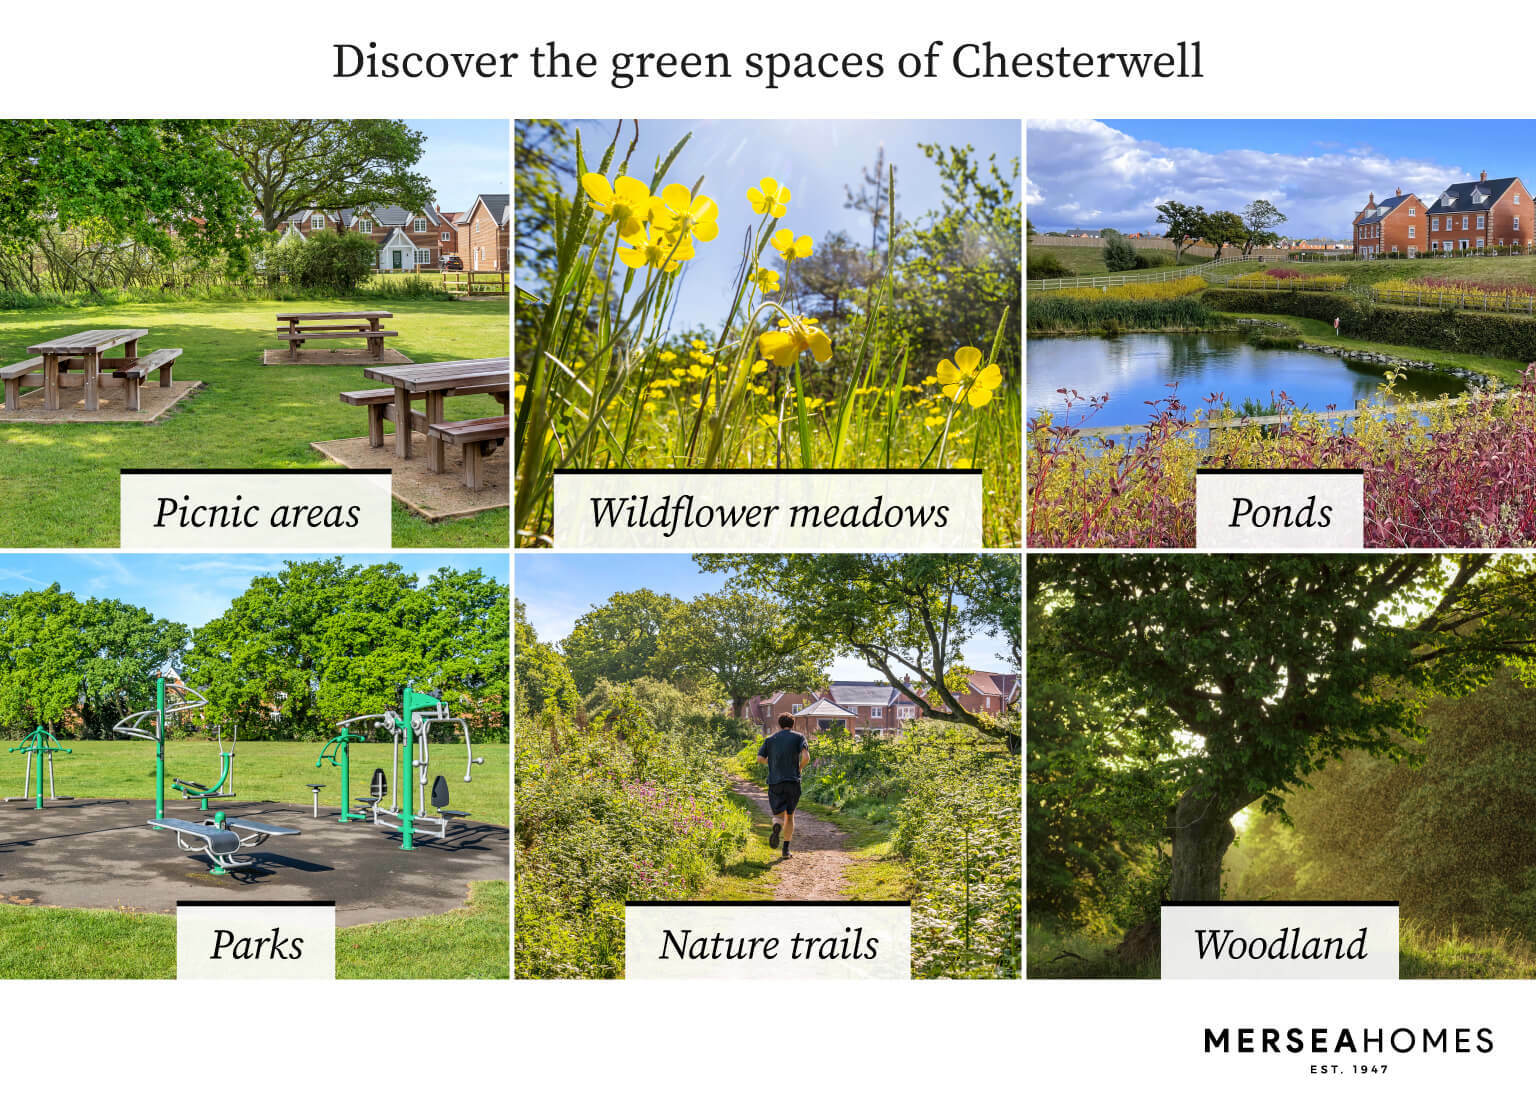 Image showing outdoor spaces of our communities - with ponds, picnic areas, wildlife meadows, woodlands, parks and trails